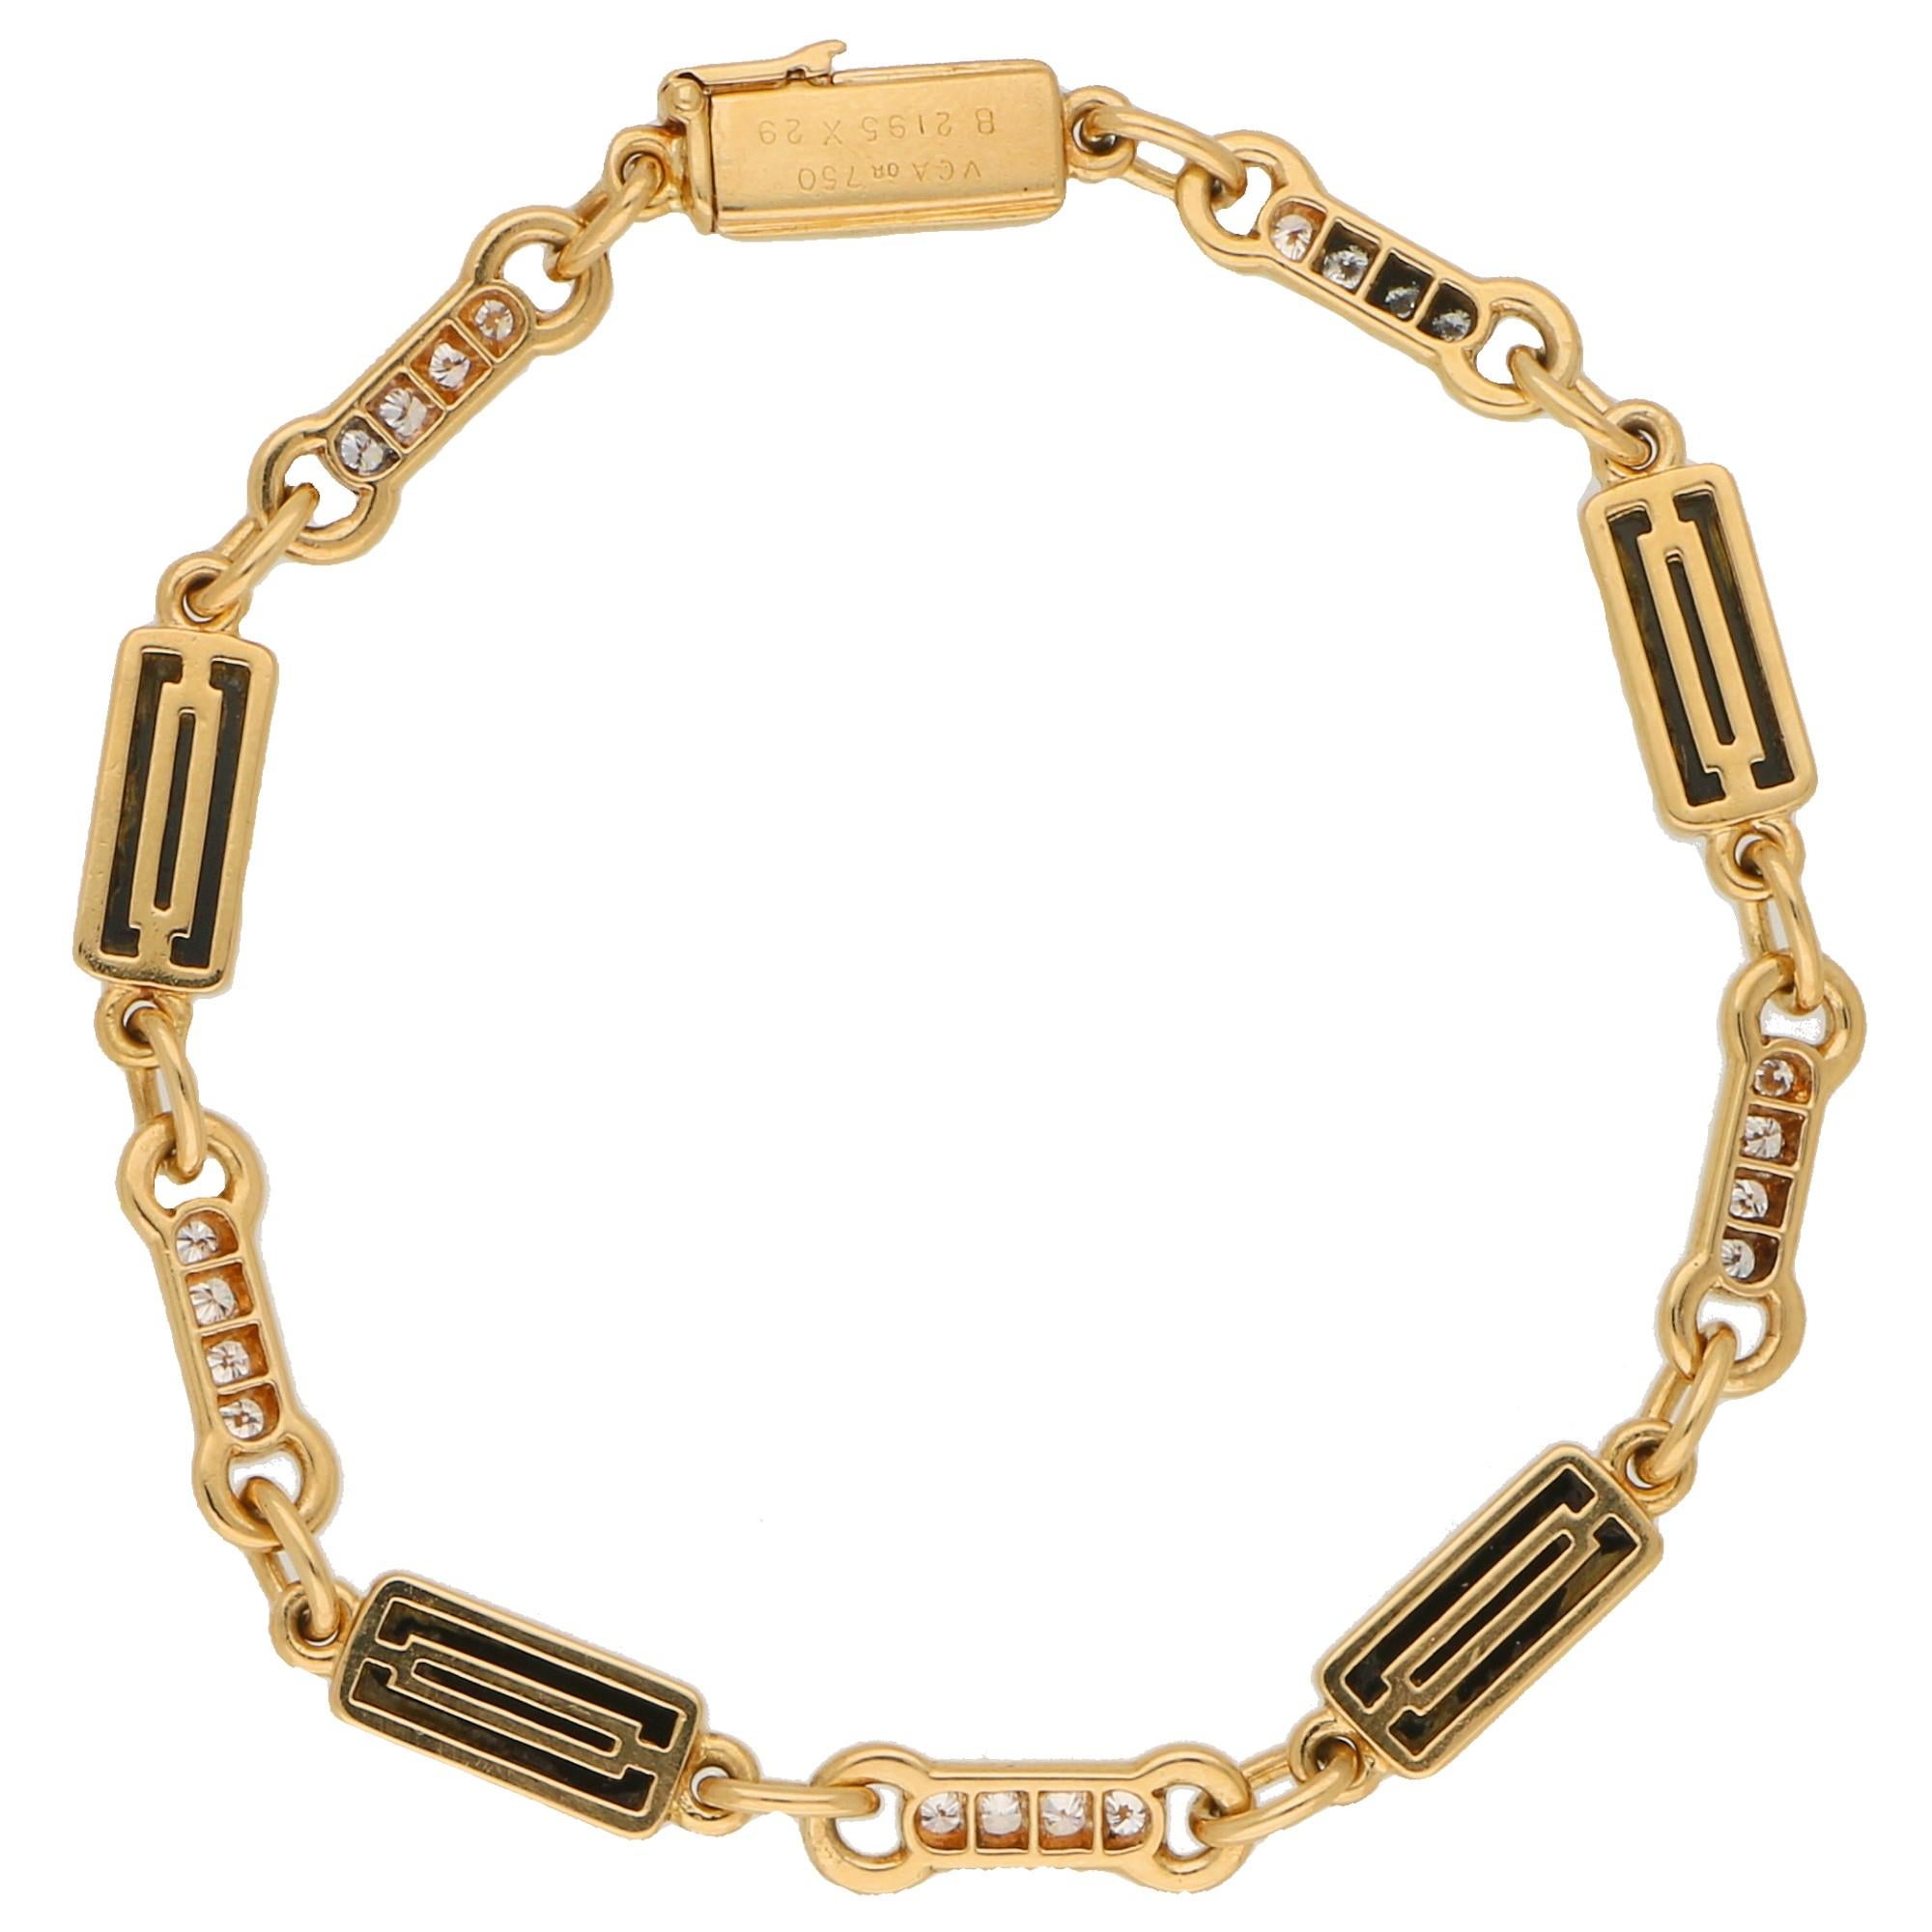  A lovely Van Cleef and Arpels onyx and diamond chain link bracelet set in 18k yellow gold.

The bracelet is composed of ten rectangular shaped panels; five of which are set with a singular piece of onyx. The rest of the panels are each individually